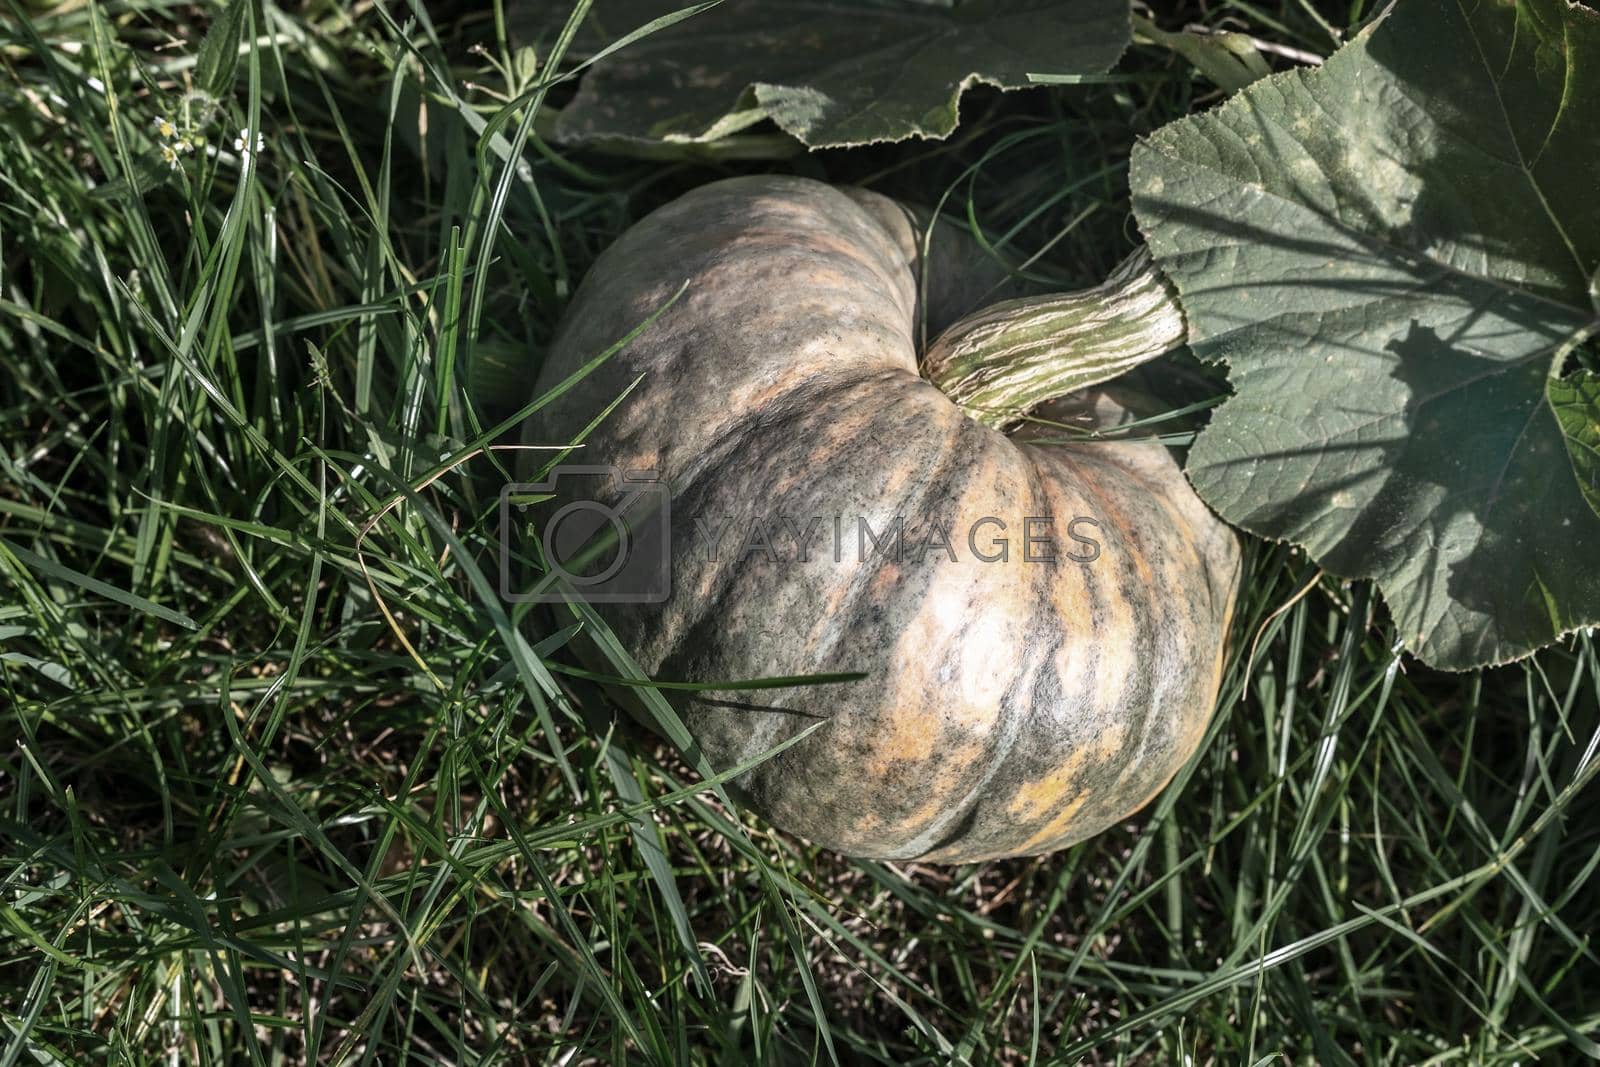 Royalty free image of Pumpkin grows in the garden among green leaves. by georgina198